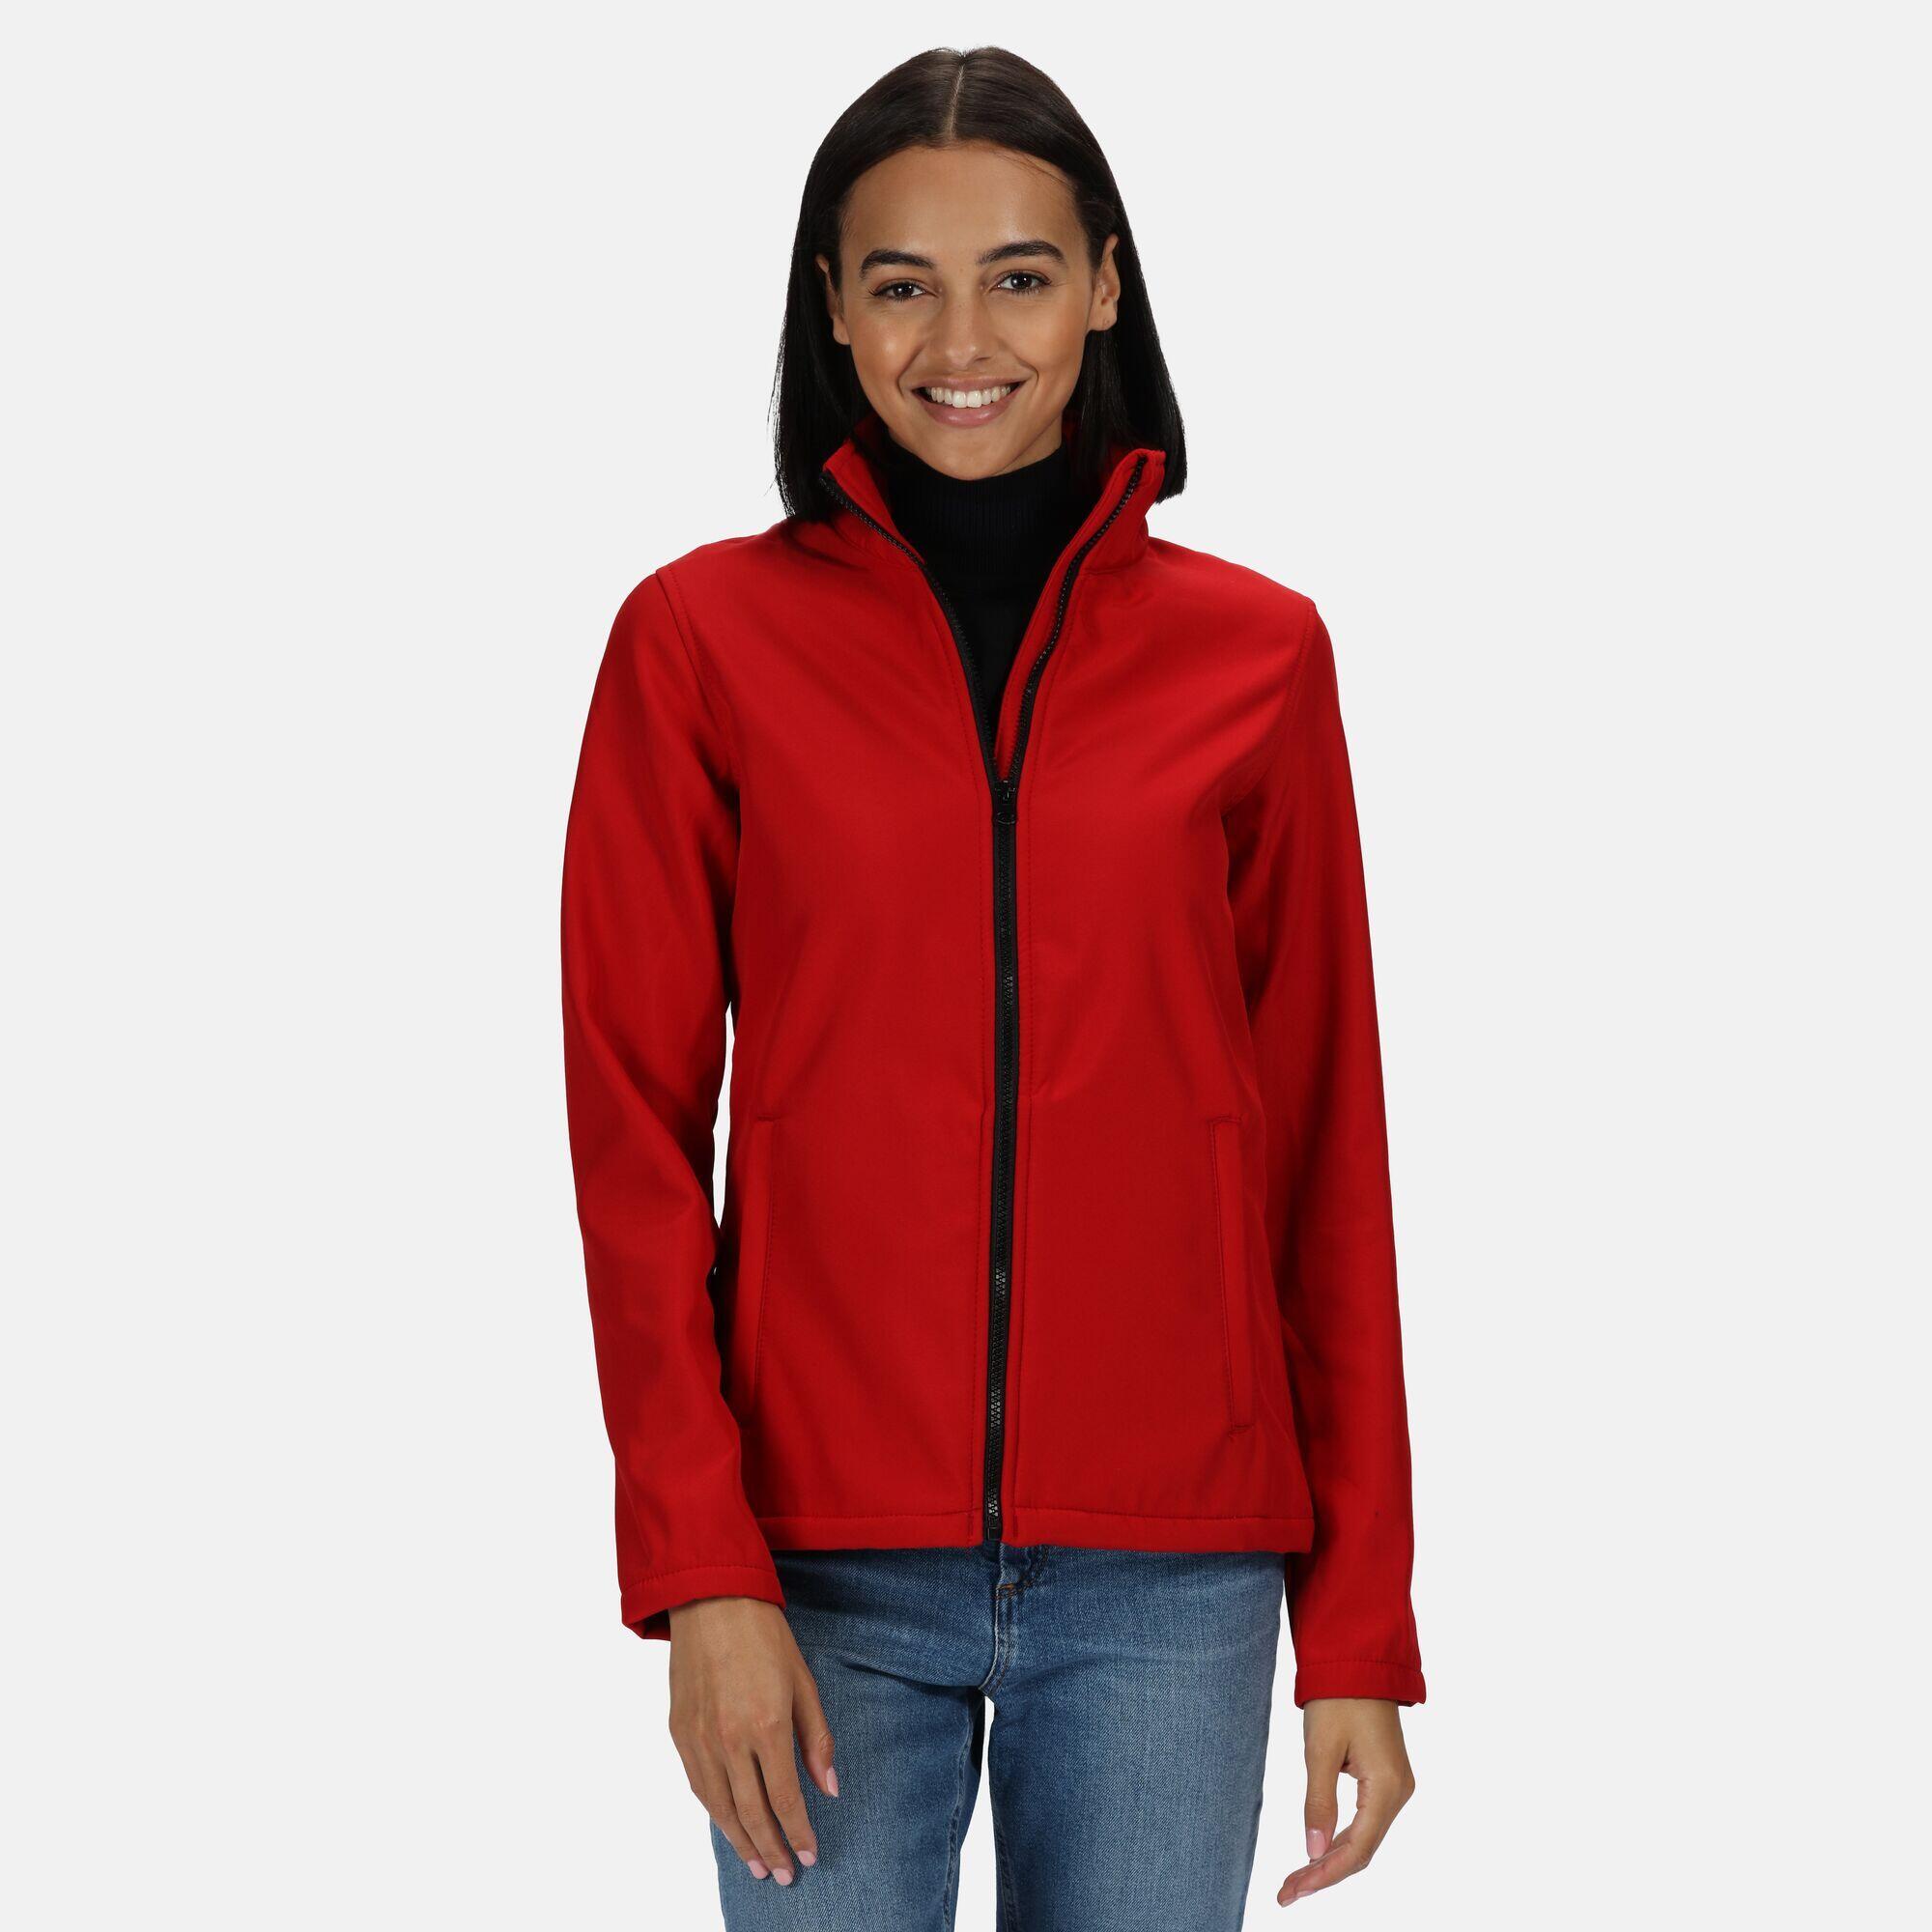 Standout Womens/Ladies Ablaze Printable Soft Shell Jacket (Classic Red/Black) 4/5